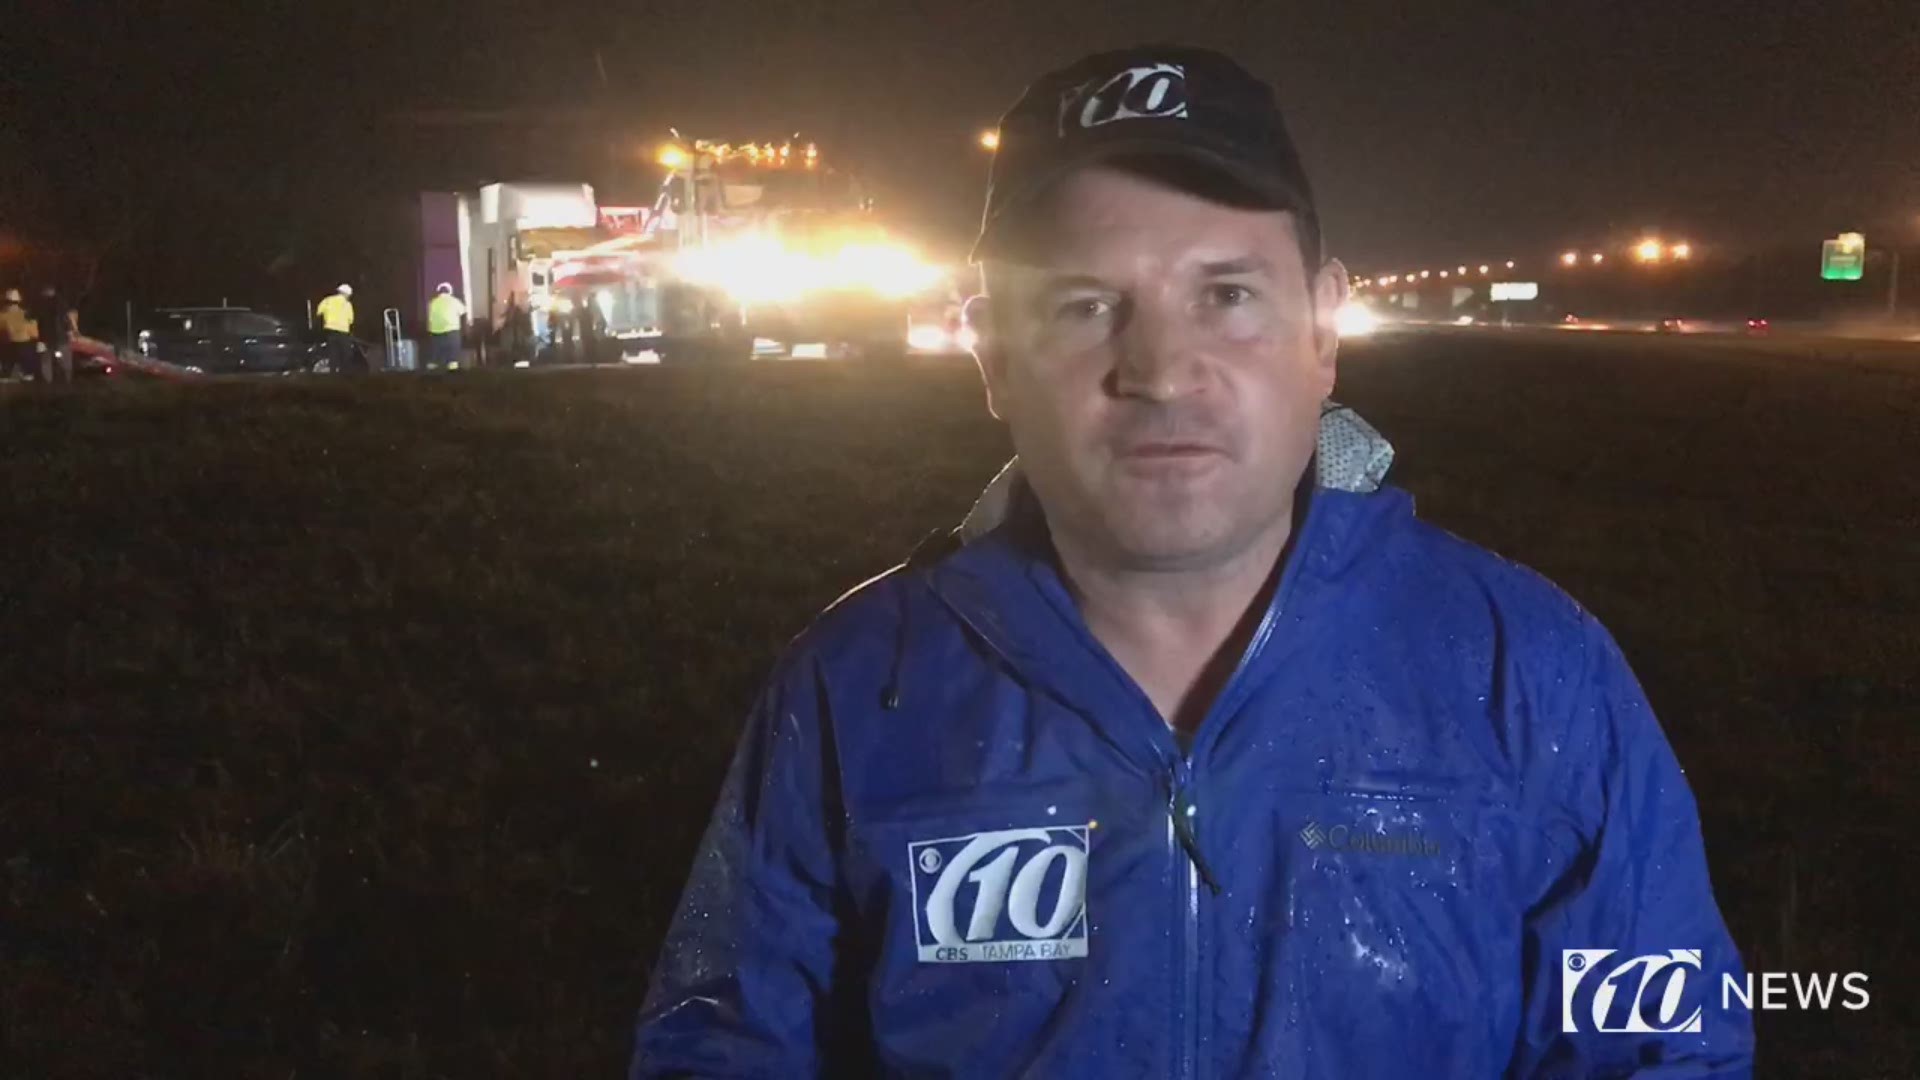 10News reporter Beau Zimmer says the semi-truck was lifted into the air by the storm.